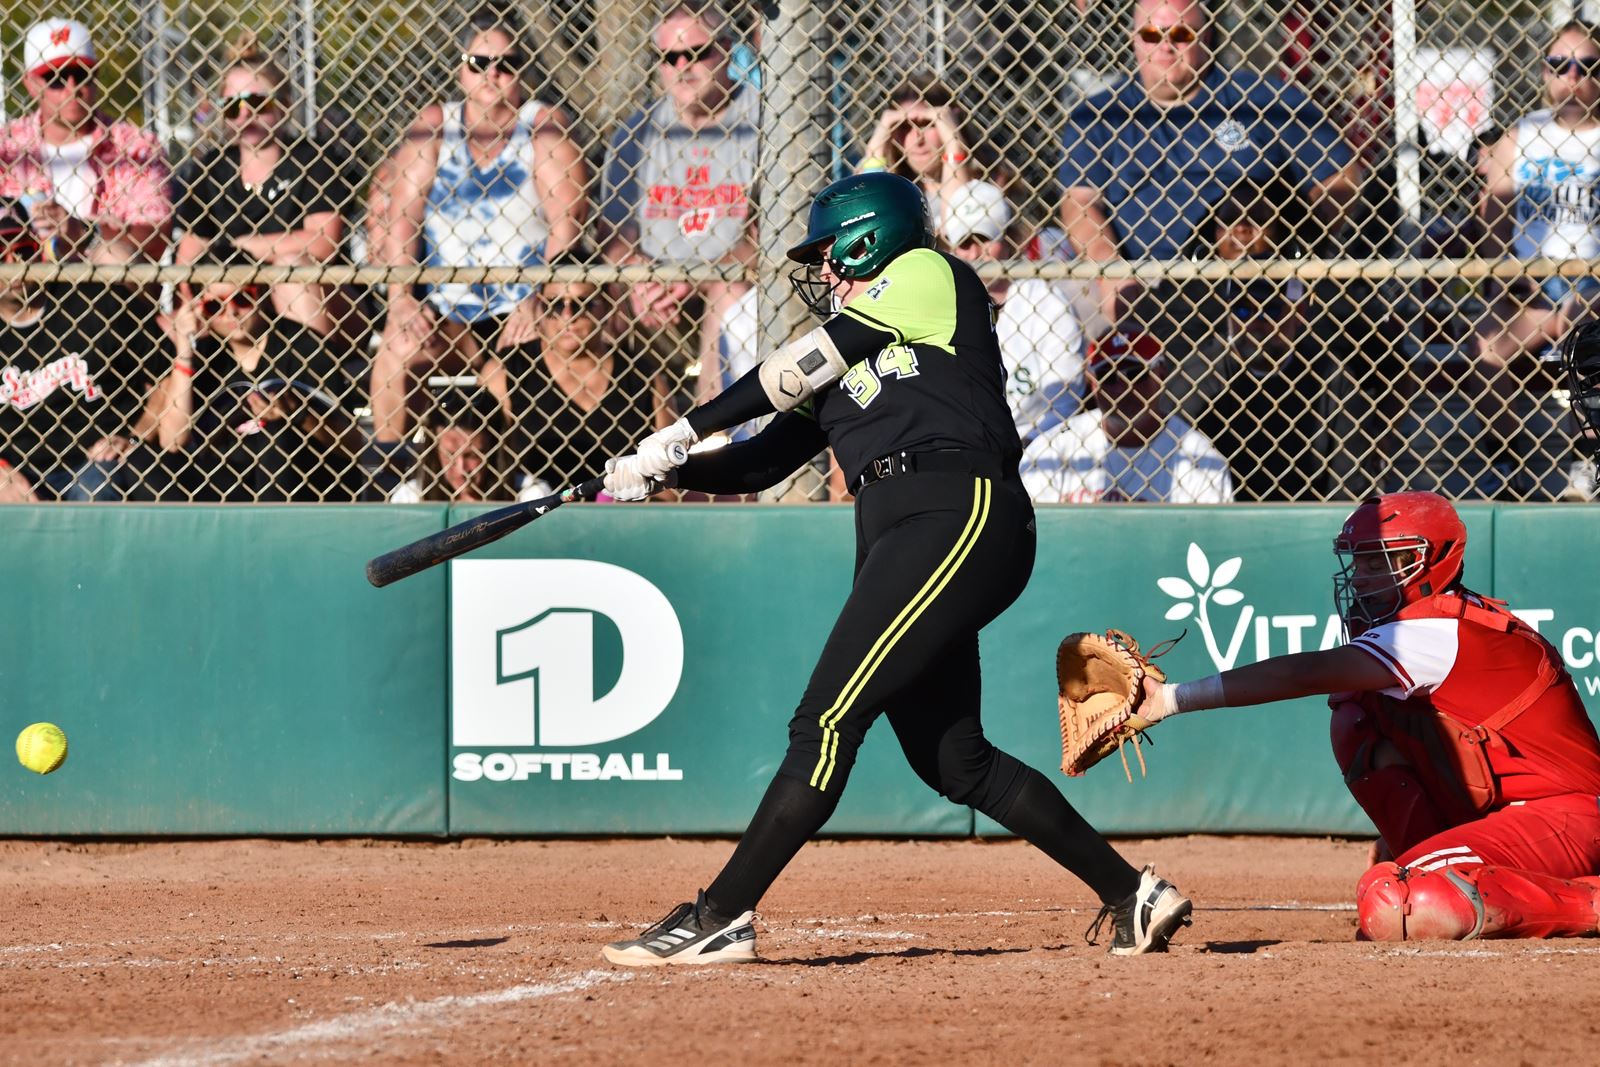 NOTEBOOK: Softball ranked in Top 25 after weekend success